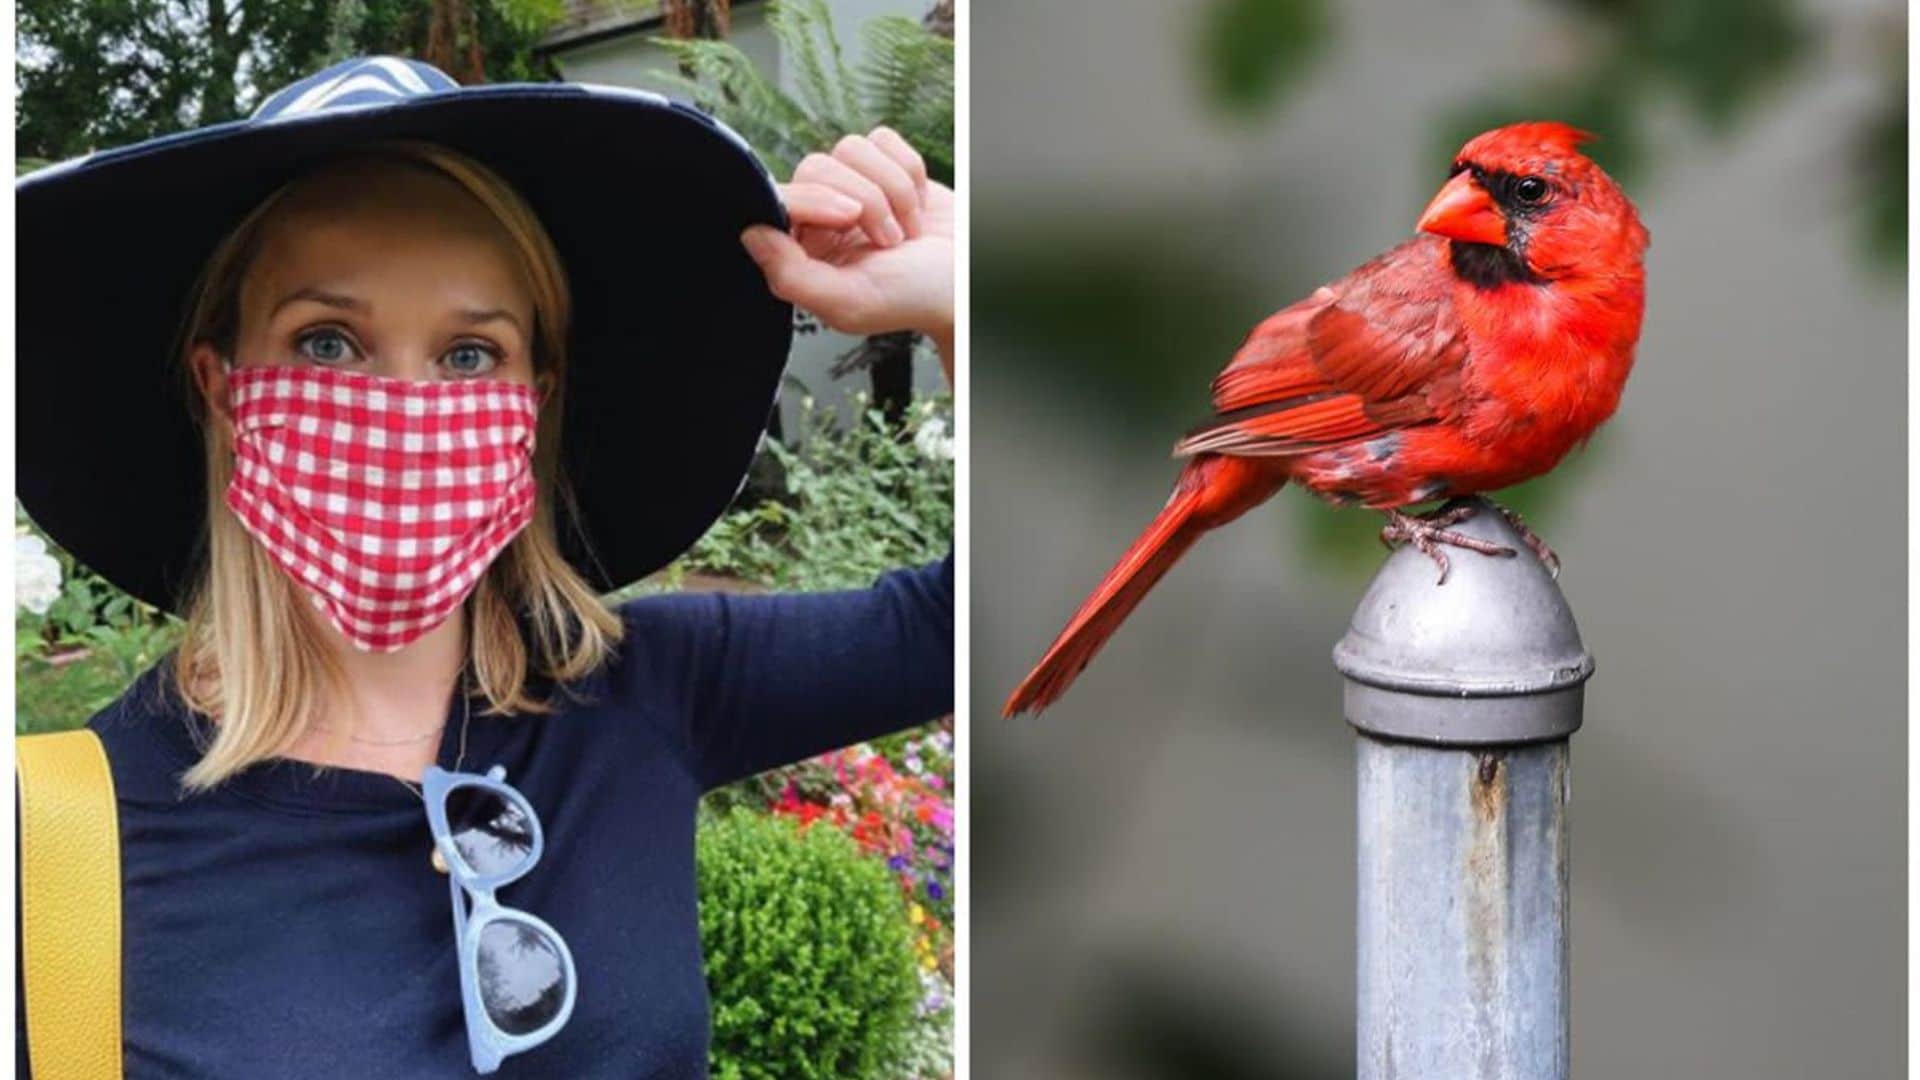 Reese Witherspoon asks fans for help after finding a cardinal bird in her home